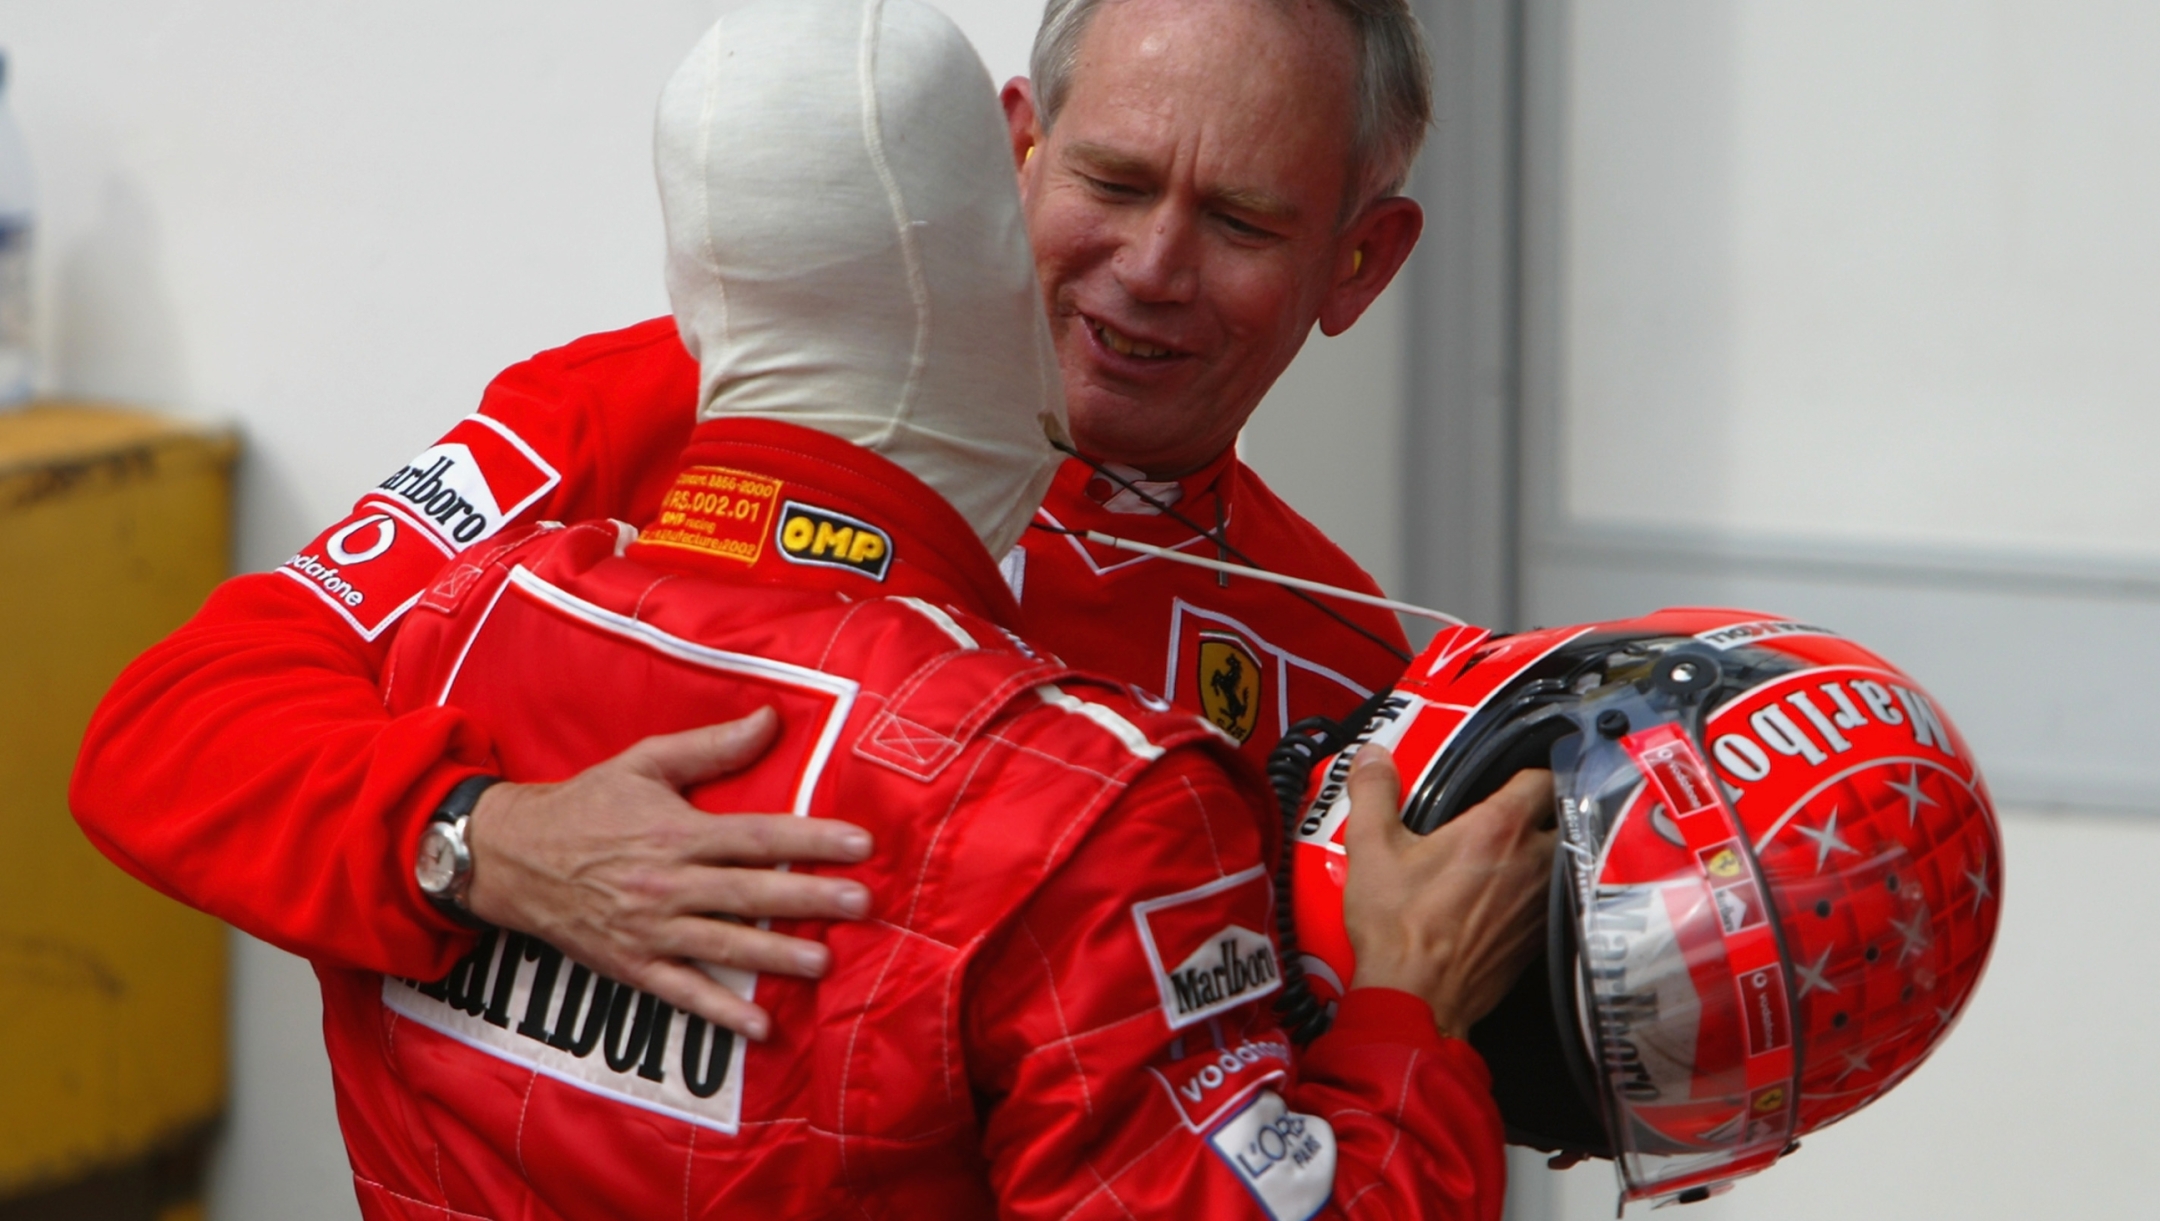 IMOLA - APRIL 14:  Ferrari driver Michael Schumacher of Germany celebrates victory with Ferrari Chief Designer Rory Byrne after the San Marino Formula One Grand Prix held in Imola, Italy on April 14, 2002. DIGITAL IMAGE. (Photo by Mark Thompson/Getty Images)